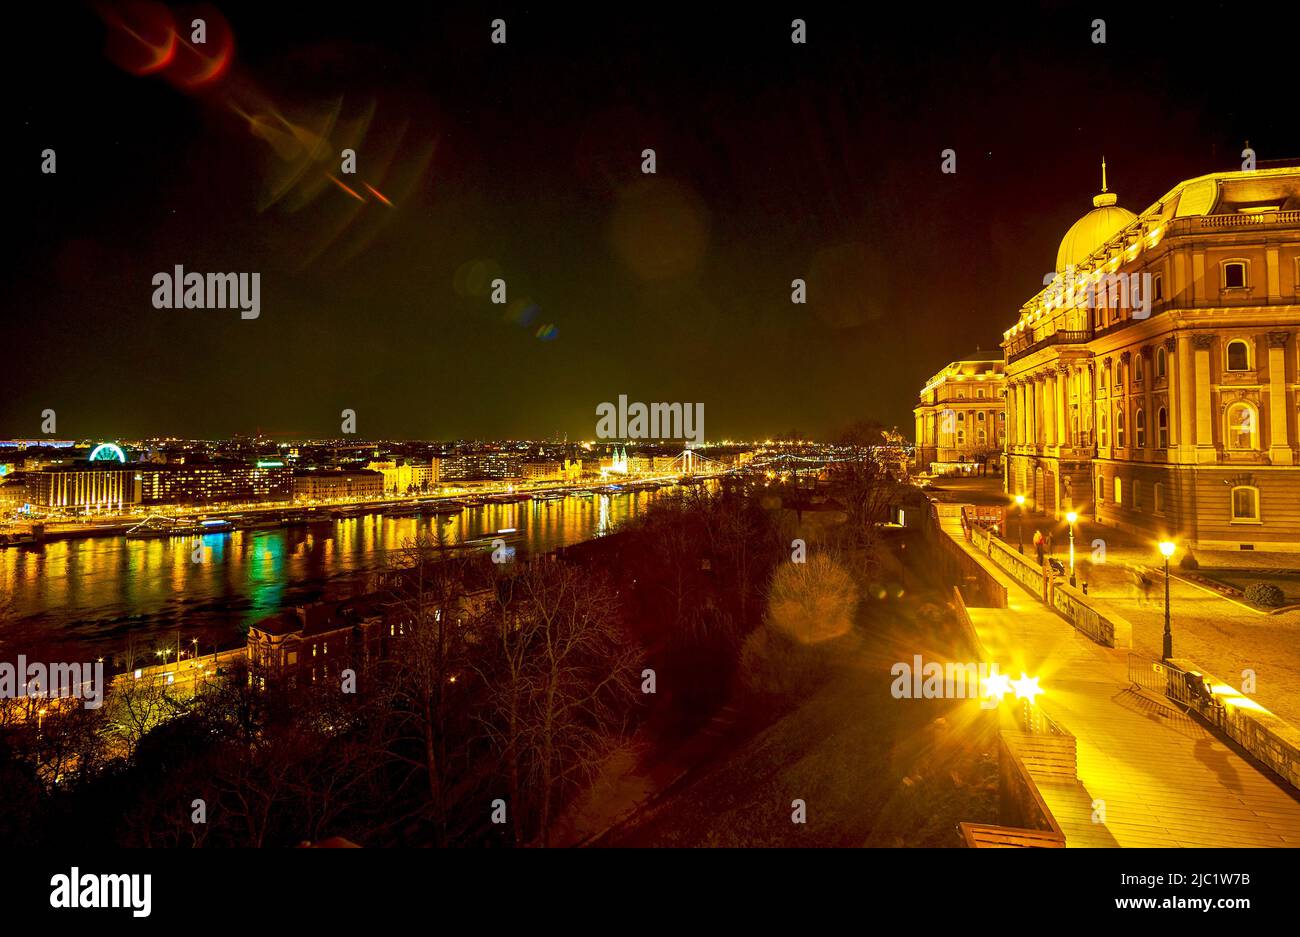 The bright night illumination of Buda Castle on Castle Hill and buildings on embankment of Danube river, Budapest, Hungary Stock Photo